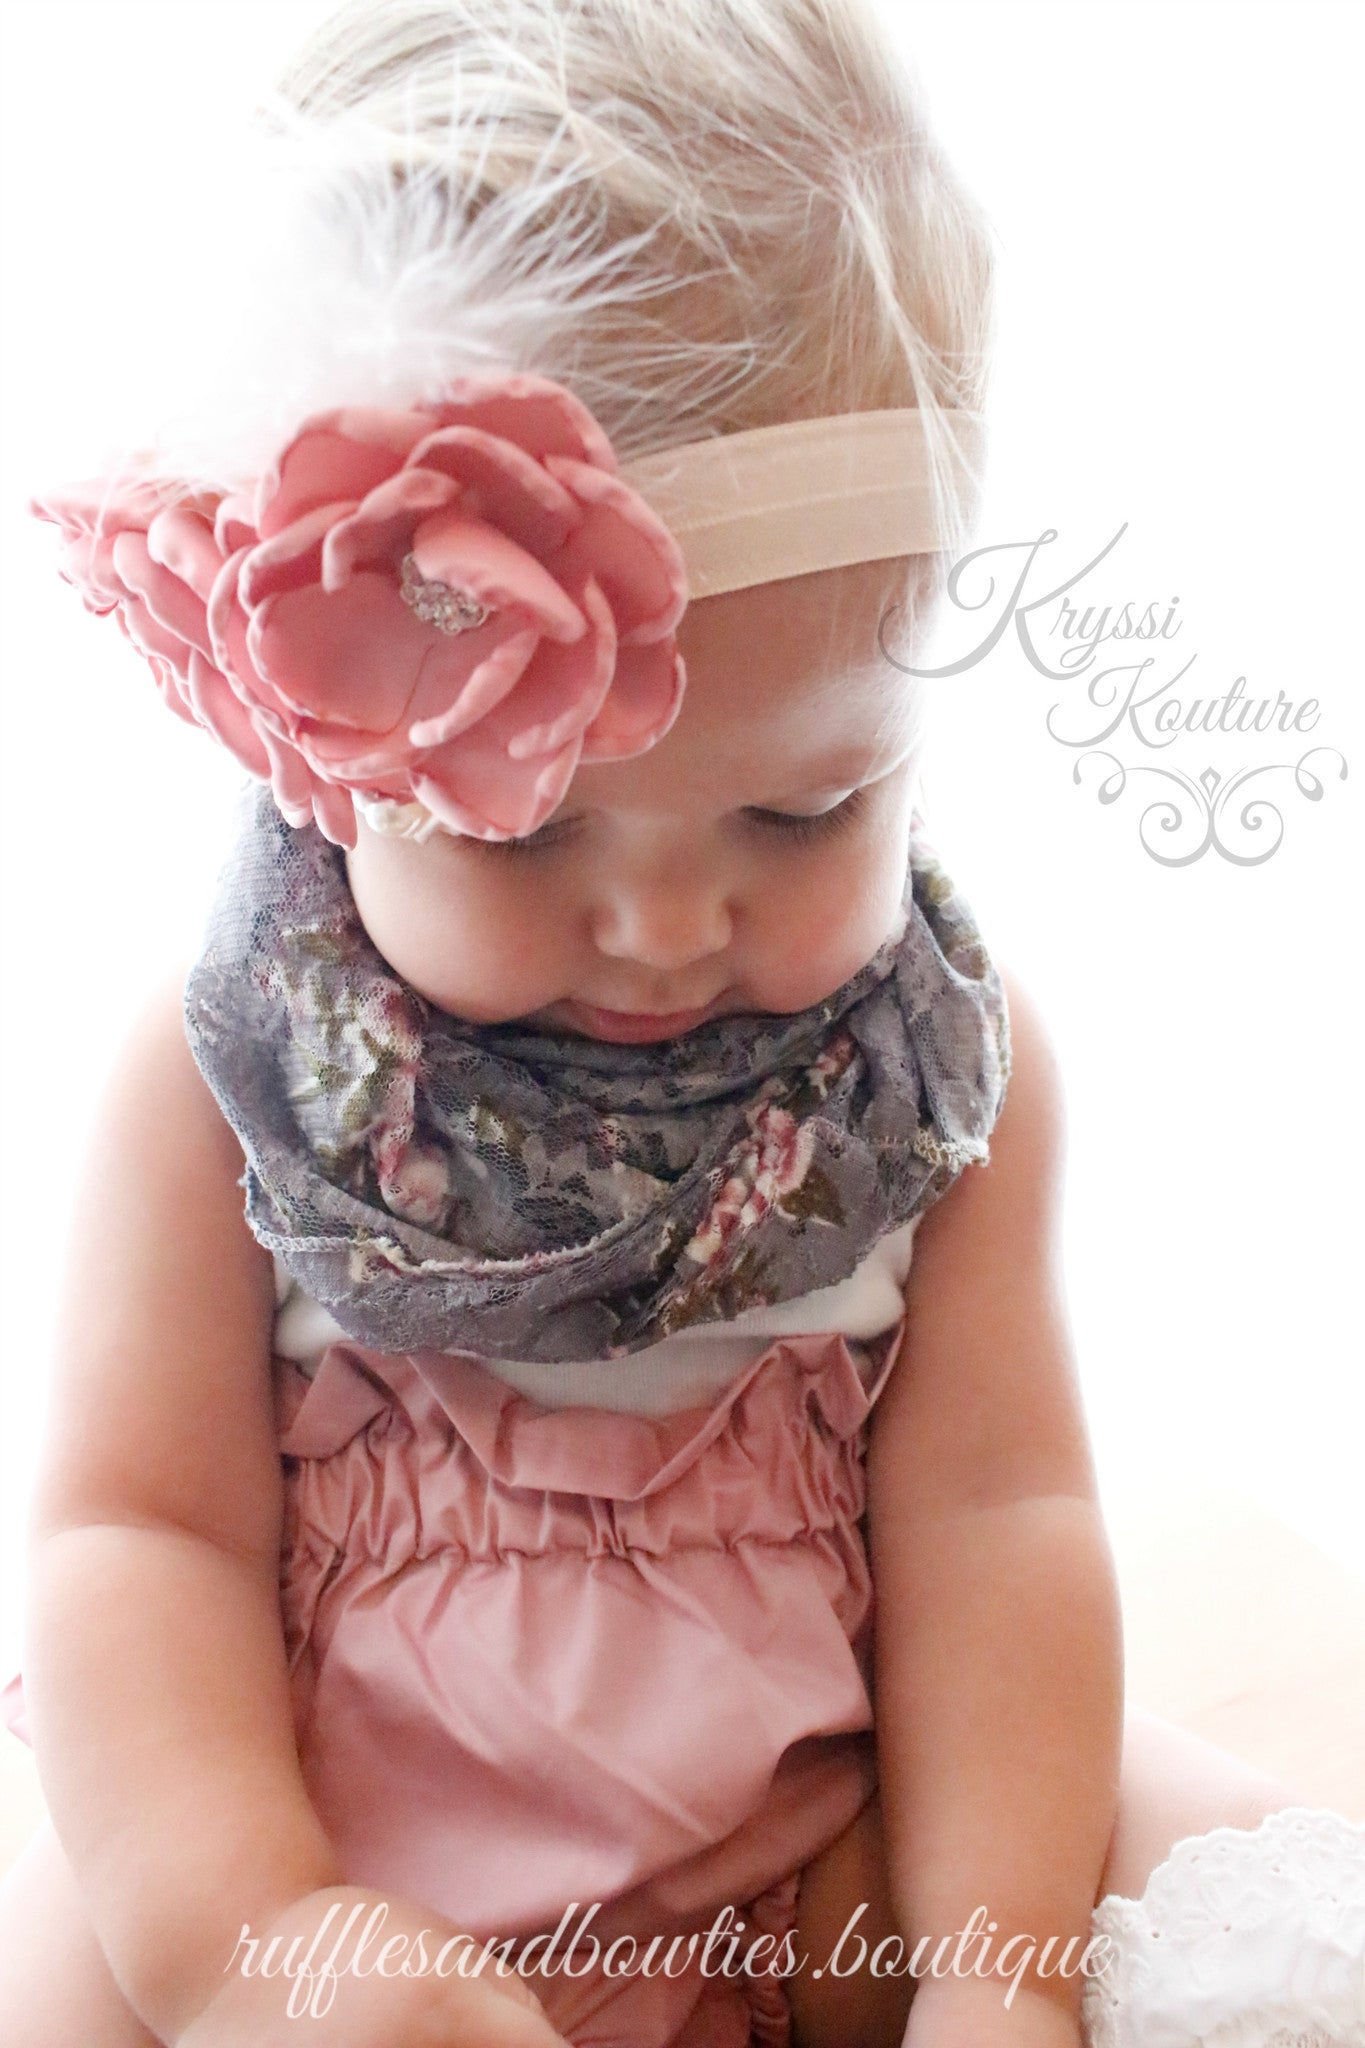 Dusty Rose Flower with Feather & Lace Headband - Ruffles & Bowties Bowtique - 2